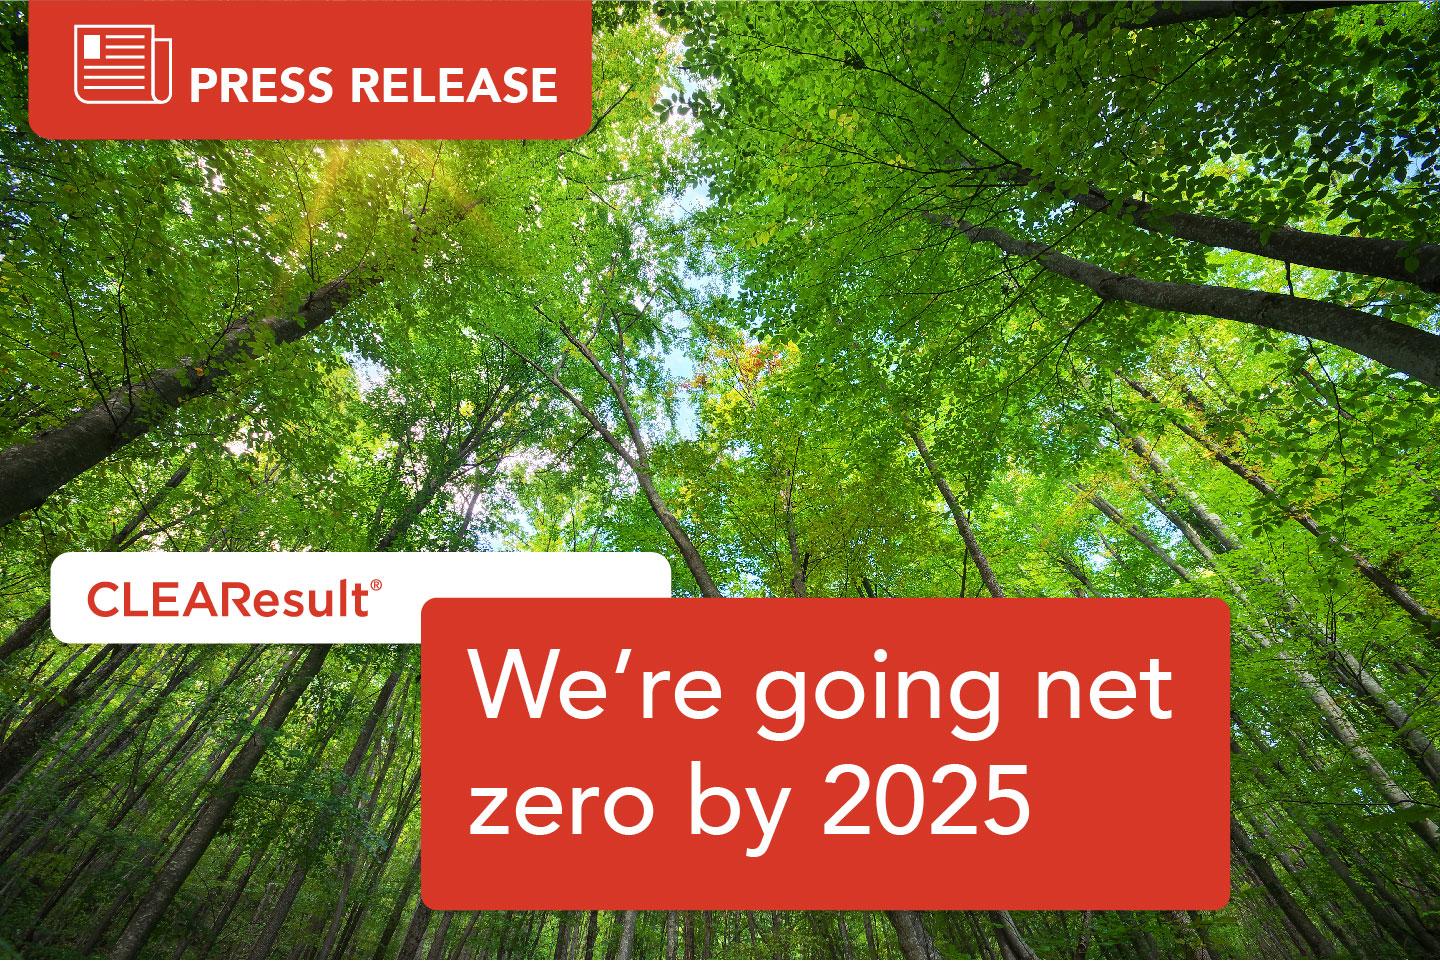 CLEAResult commits to reaching net zero by 2025